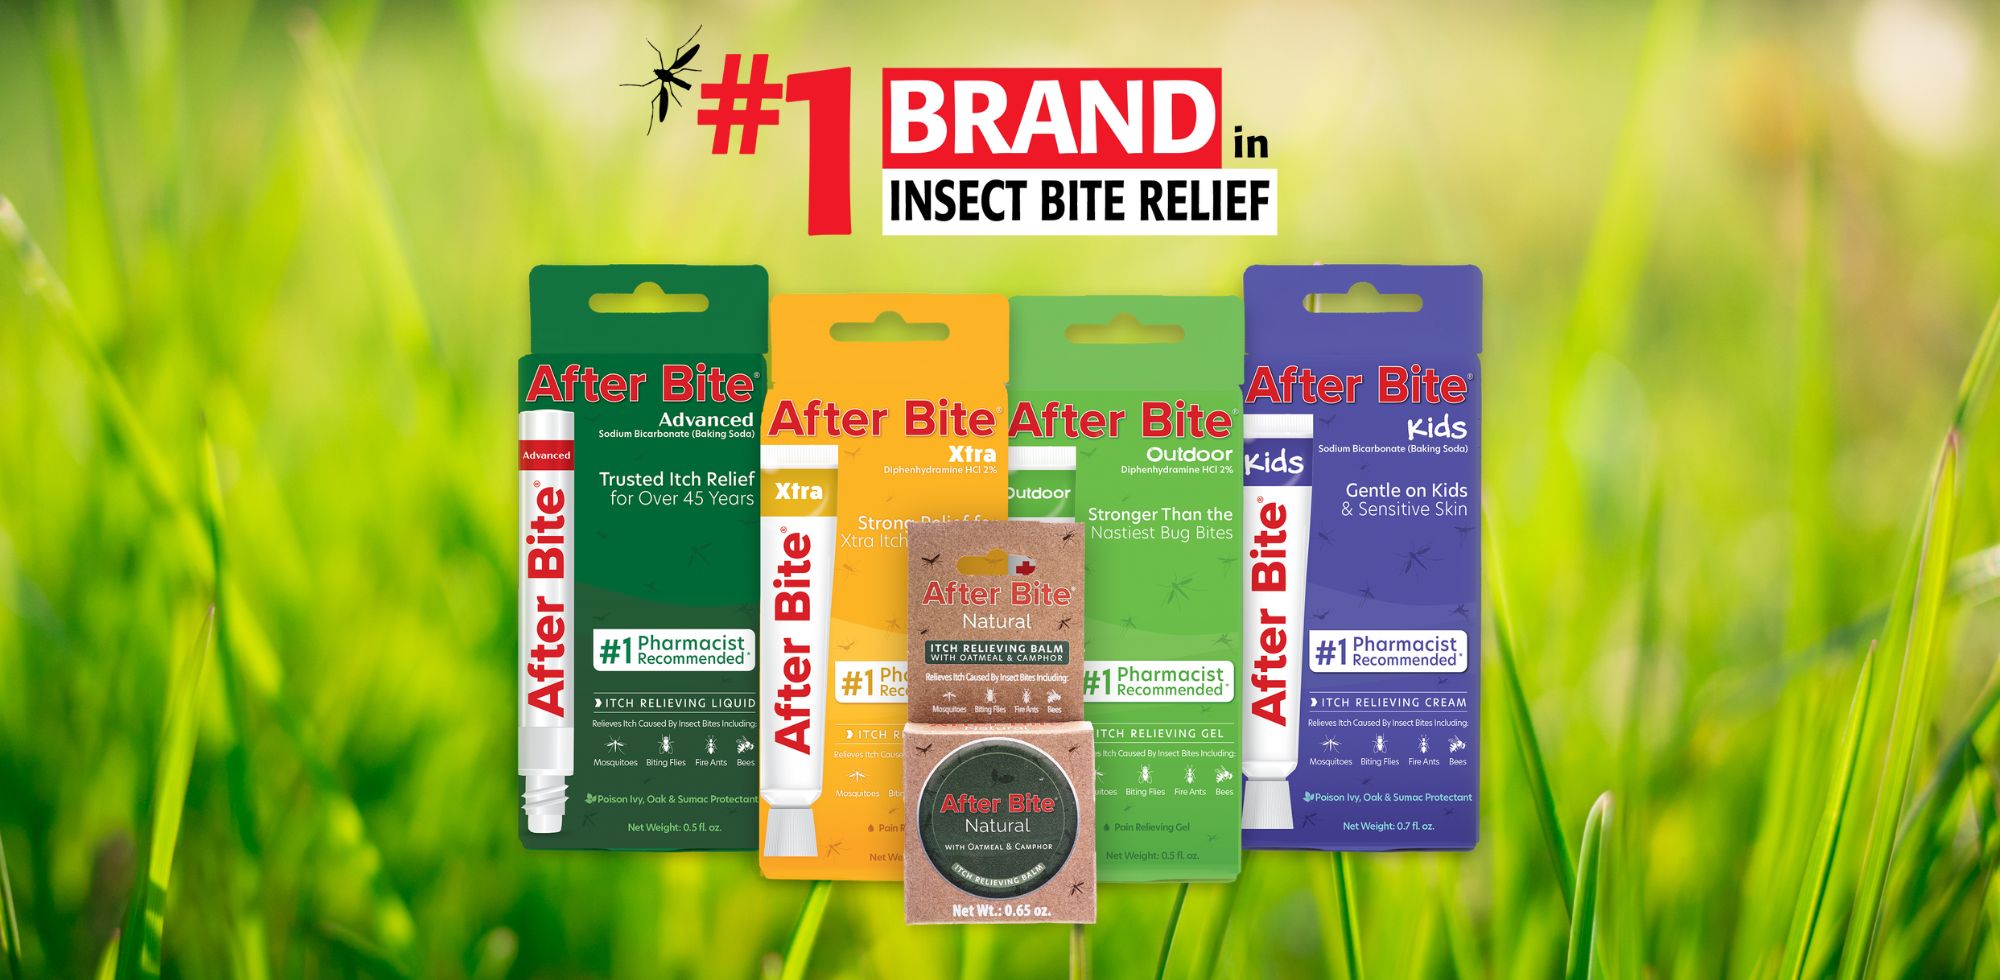 After Bite boxes in front of grass with #1 brand in insect bite relief text